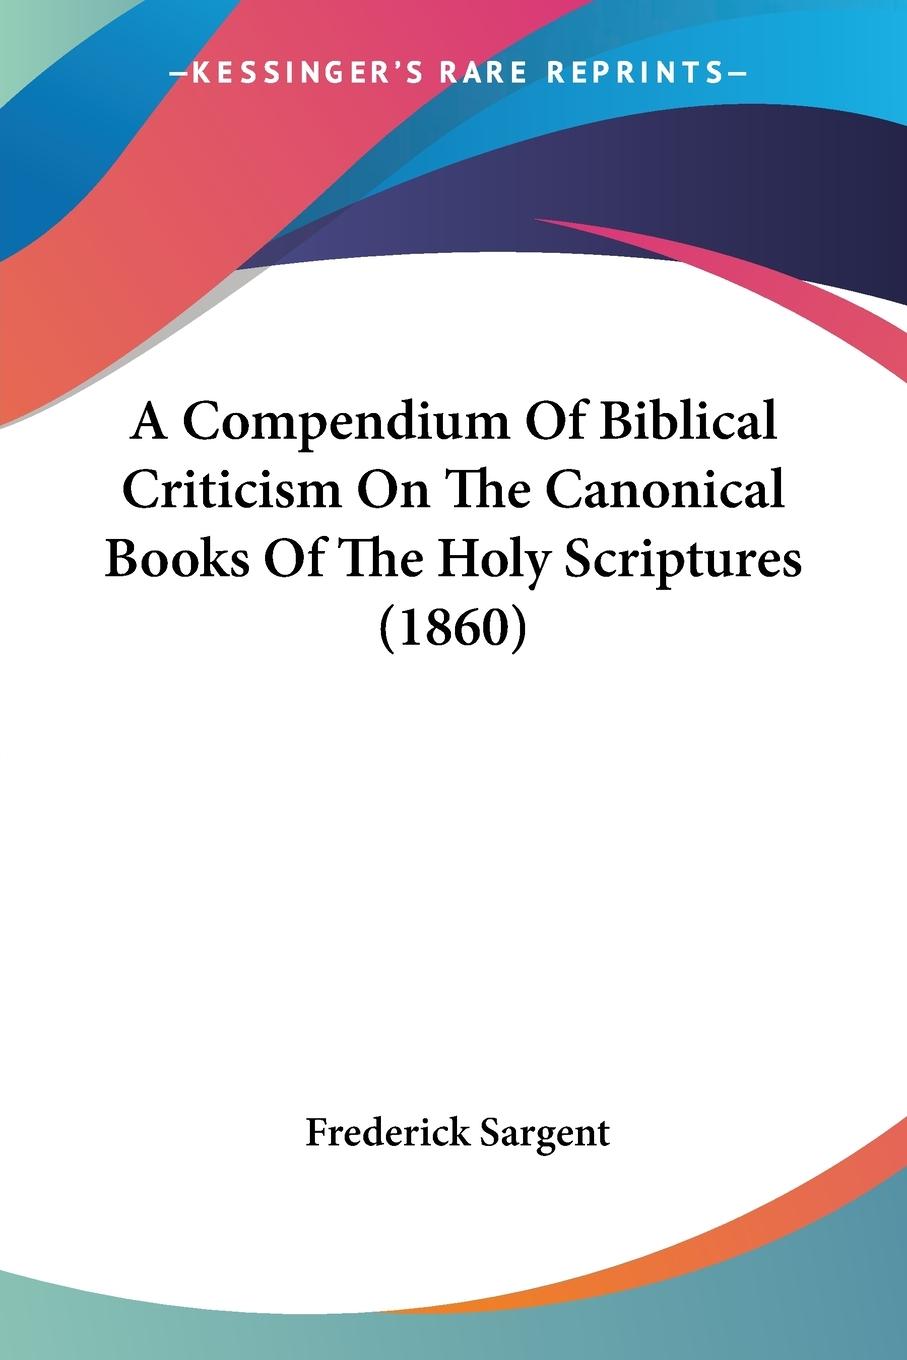 A Compendium Of Biblical Criticism On The Canonical Books Of The Holy Scriptures (1860) - Sargent, Frederick